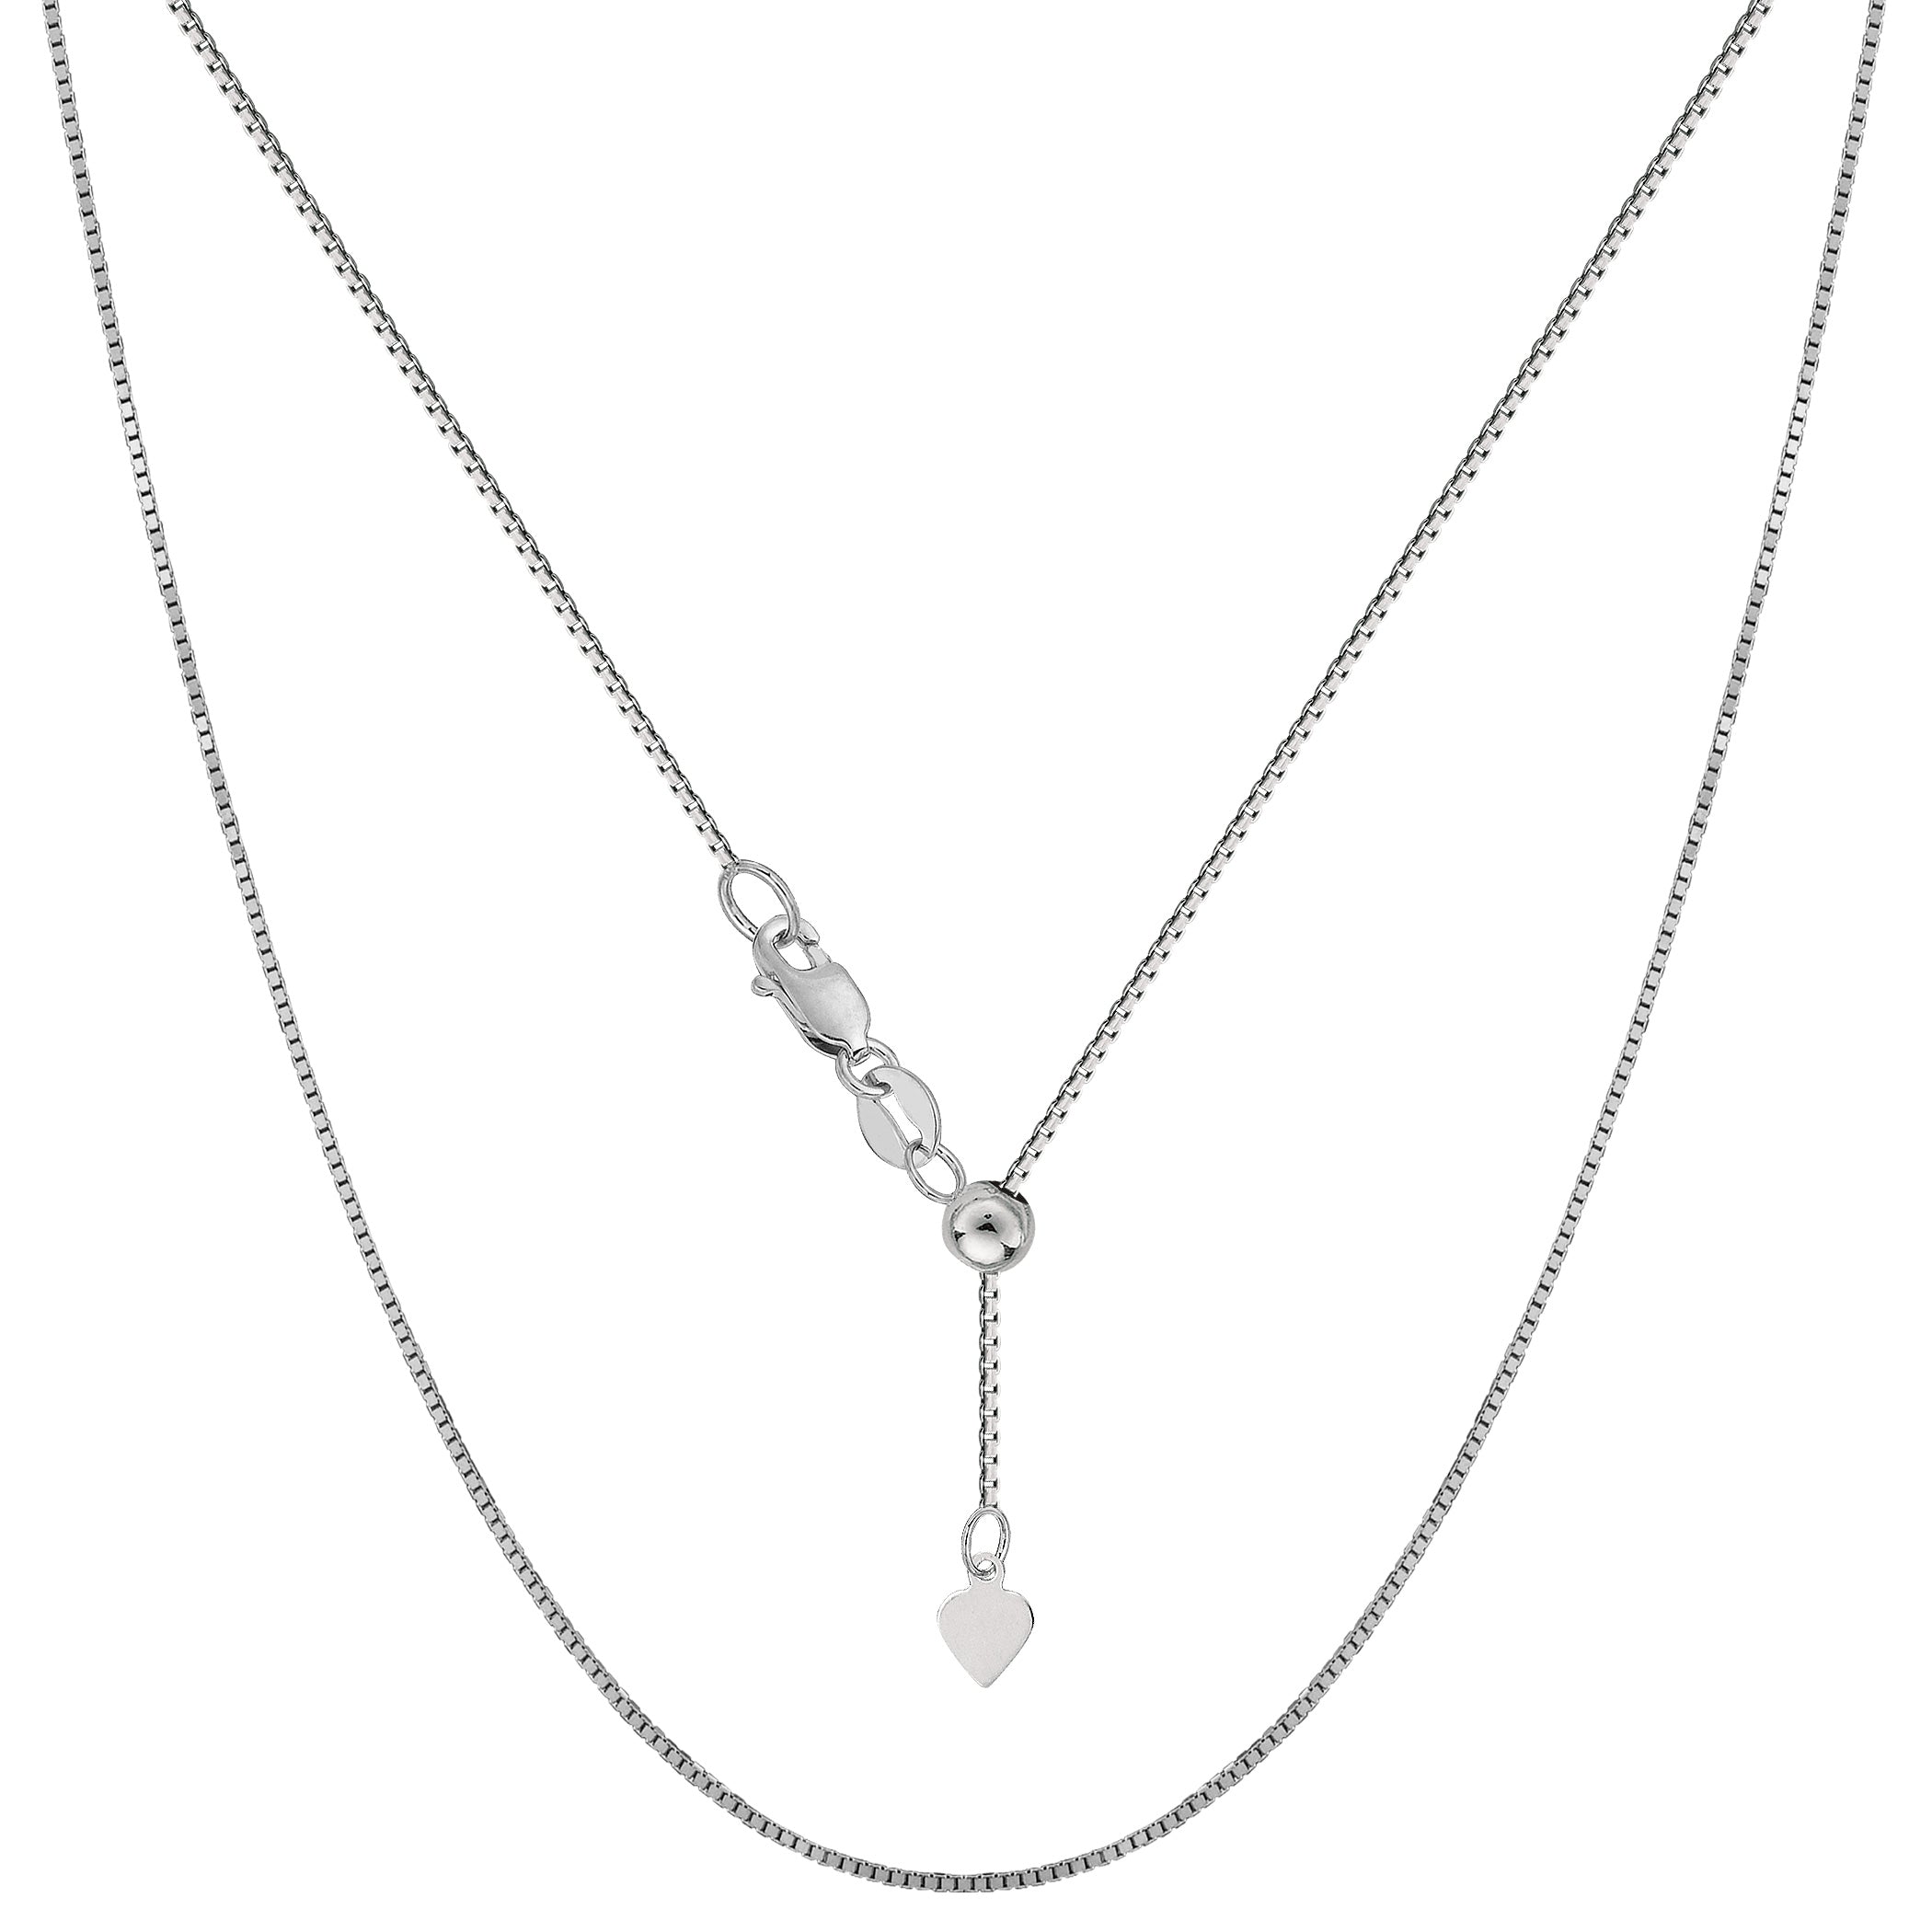 14k White Gold Adjustable Box Link Chain Necklace, 0.7mm, 22" fine designer jewelry for men and women